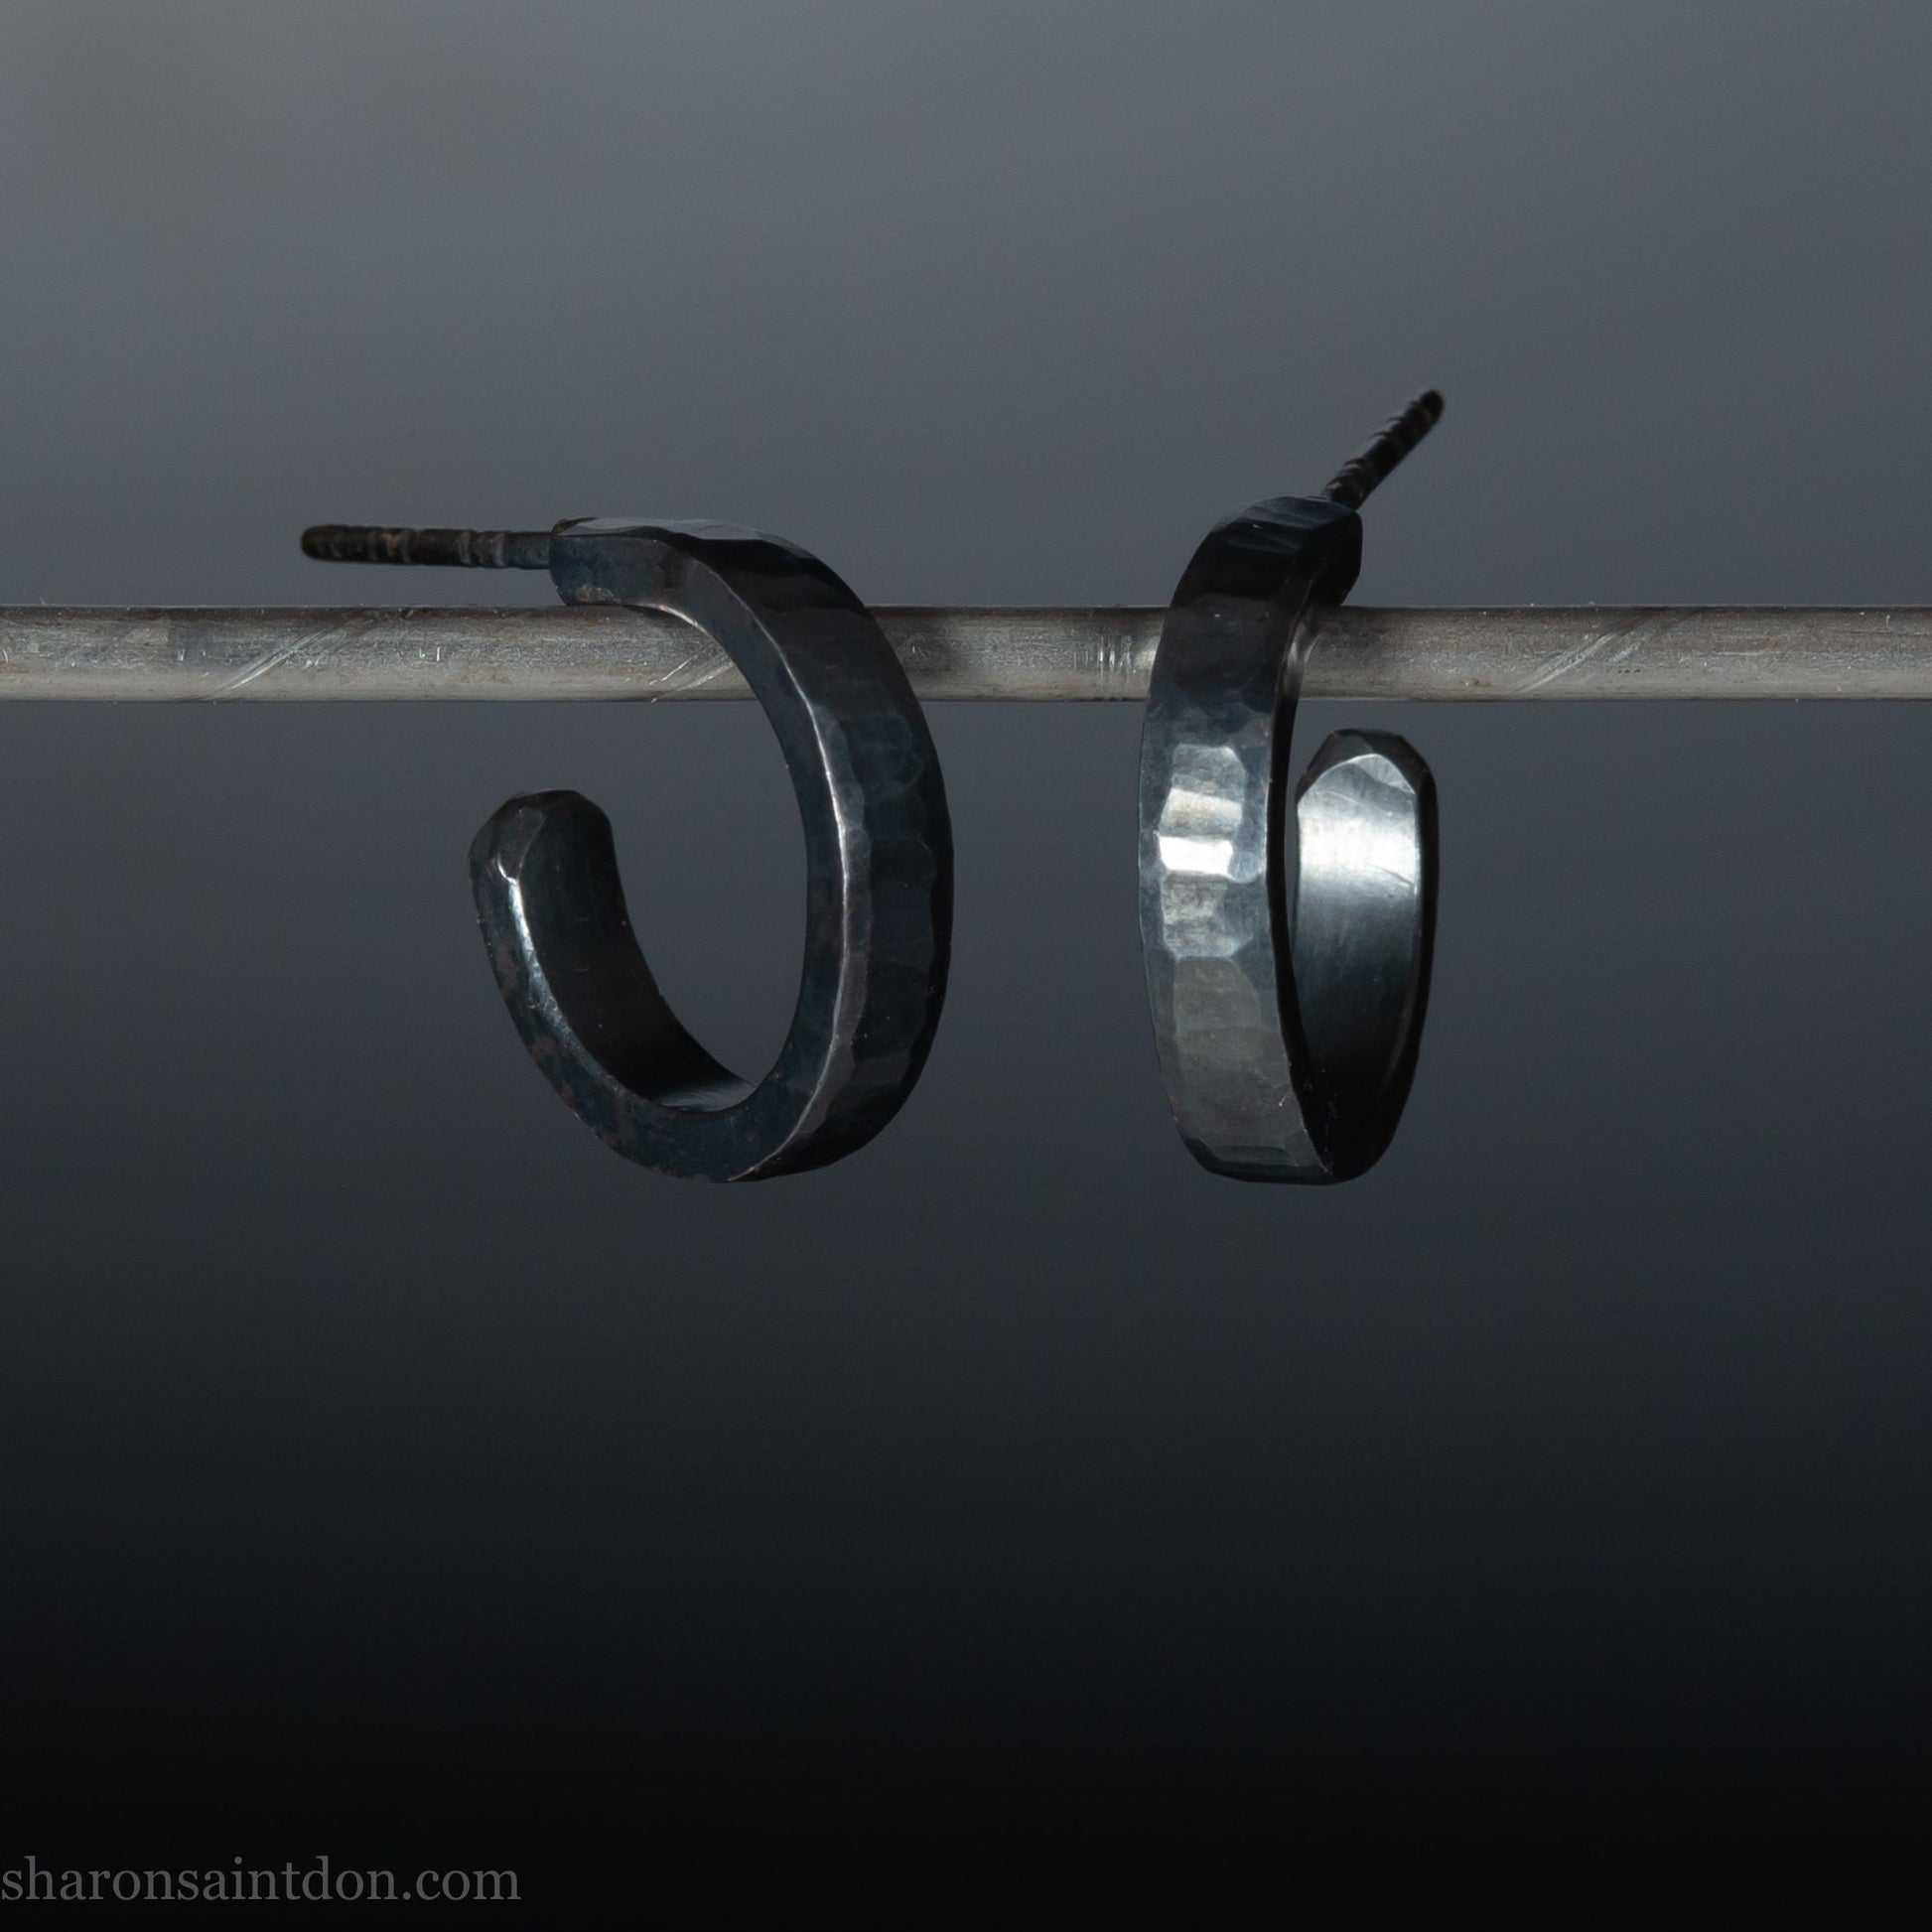 Handmade 925 sterling silver hoop earrings for men or women. 18mm x 3mm, round, oxidized black earrings with hammered texture, made by Sharon SaintDon in North America.